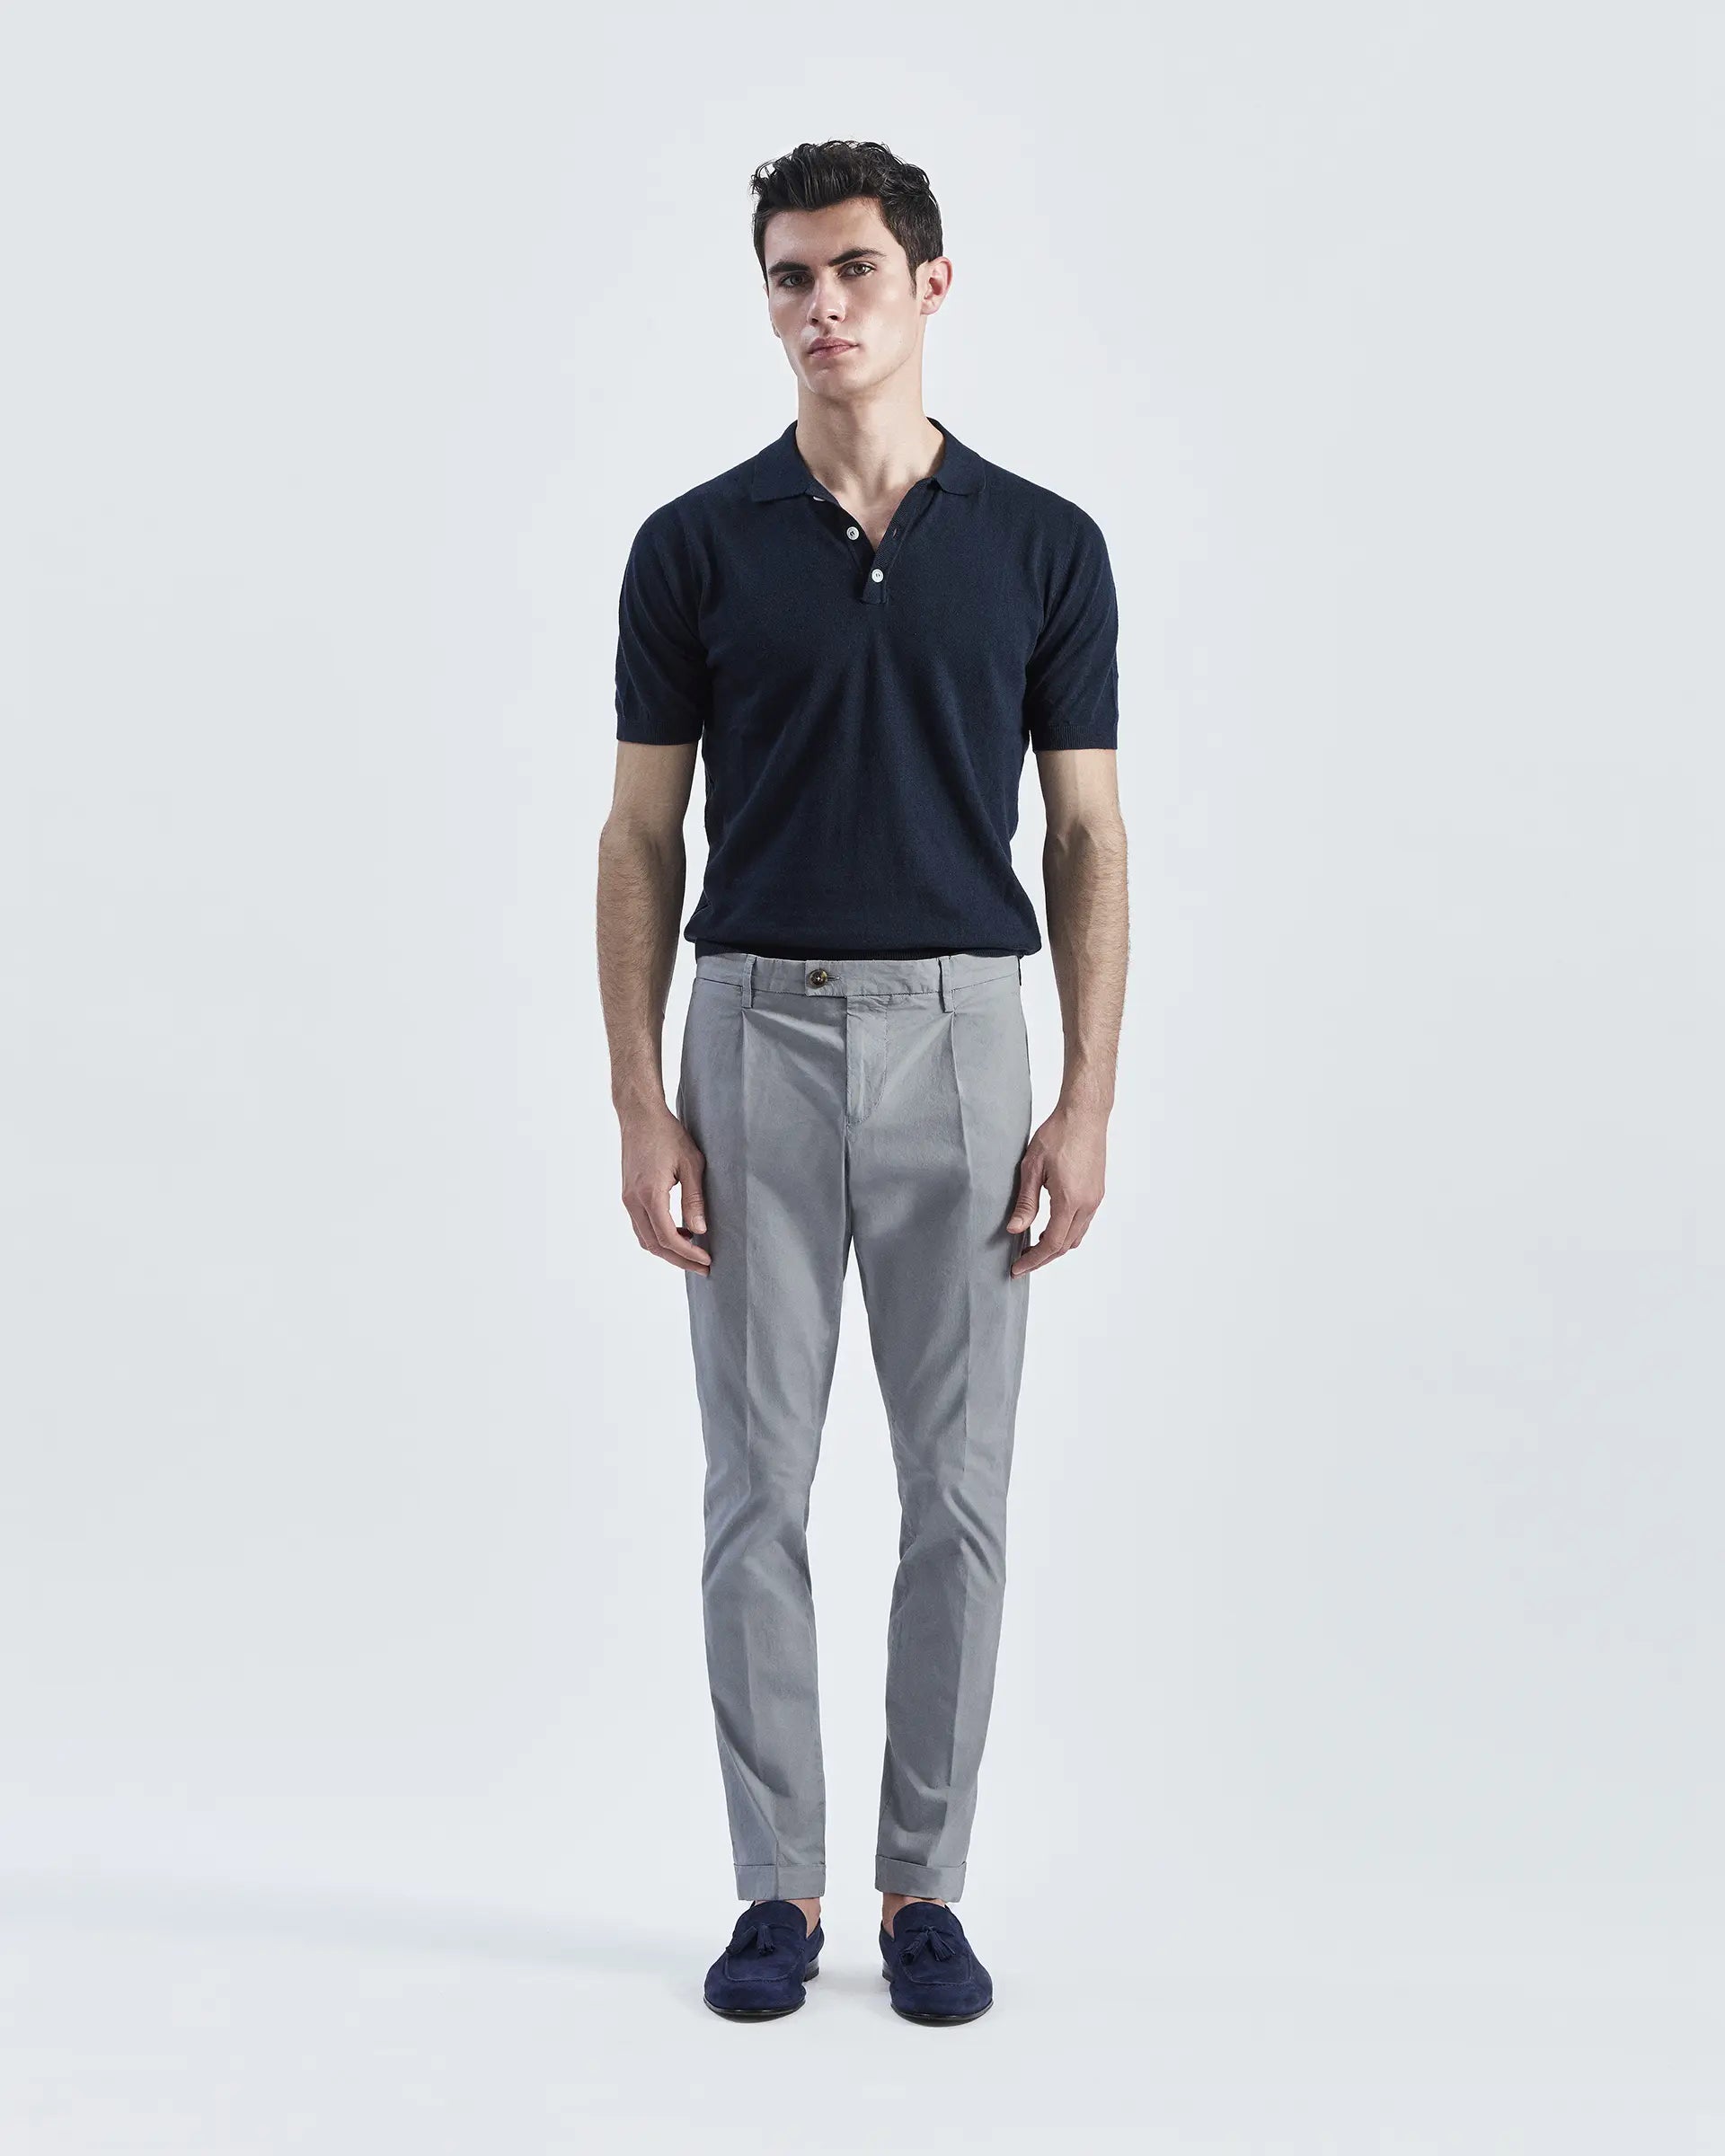 Grey Cotton Stretch Pleated Pants